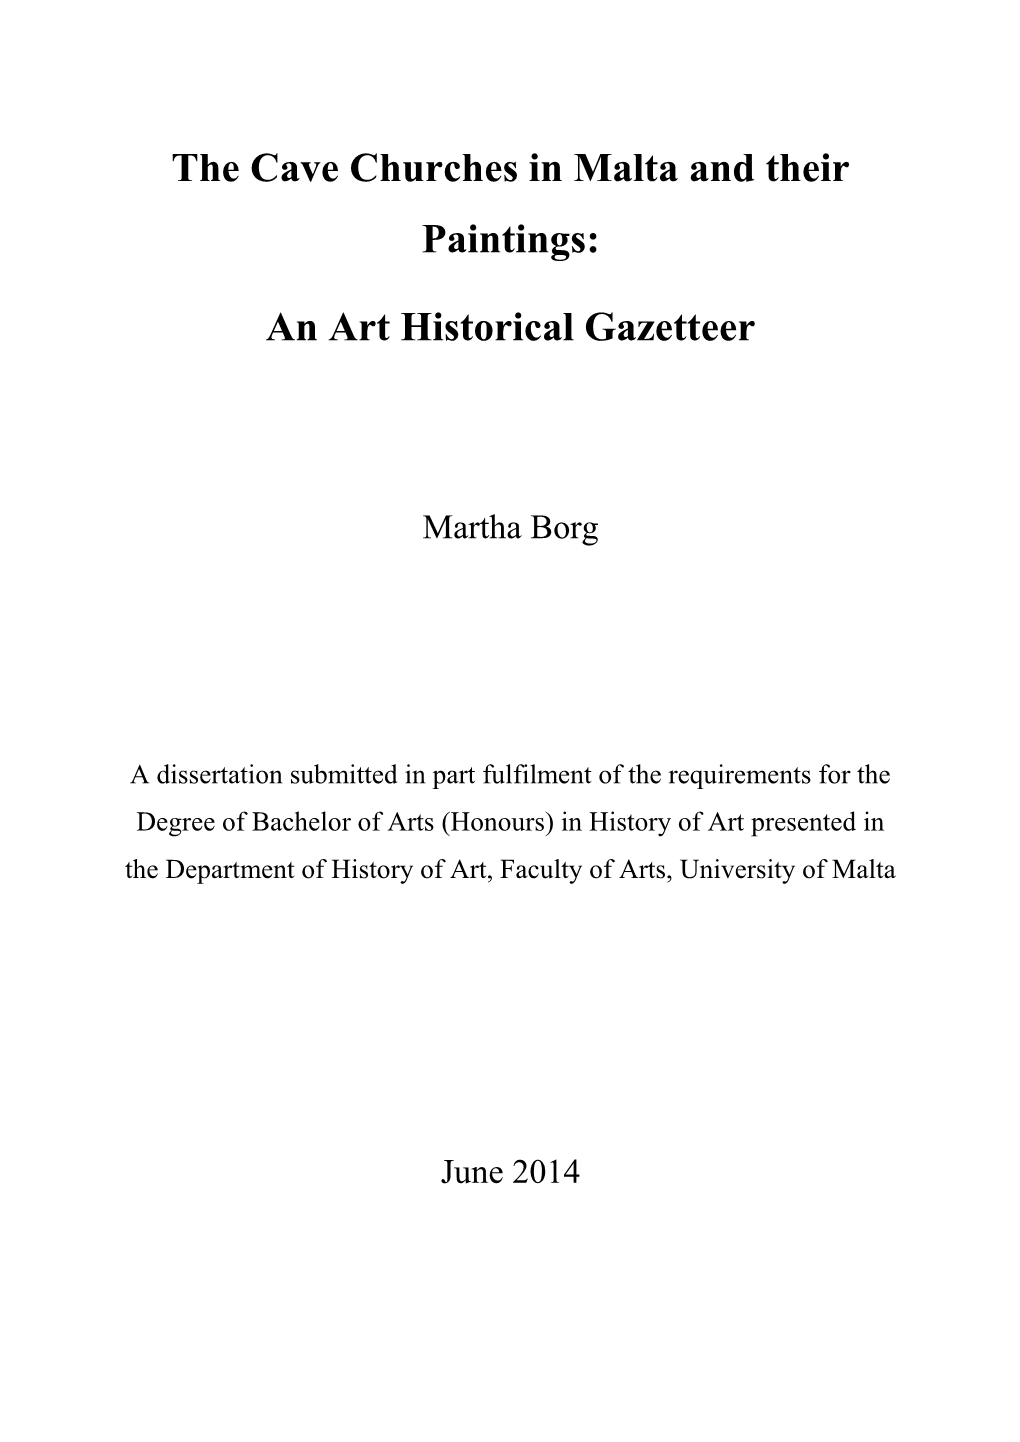 The Cave Churches in Malta and Their Paintings: an Art Historical Gazetteer